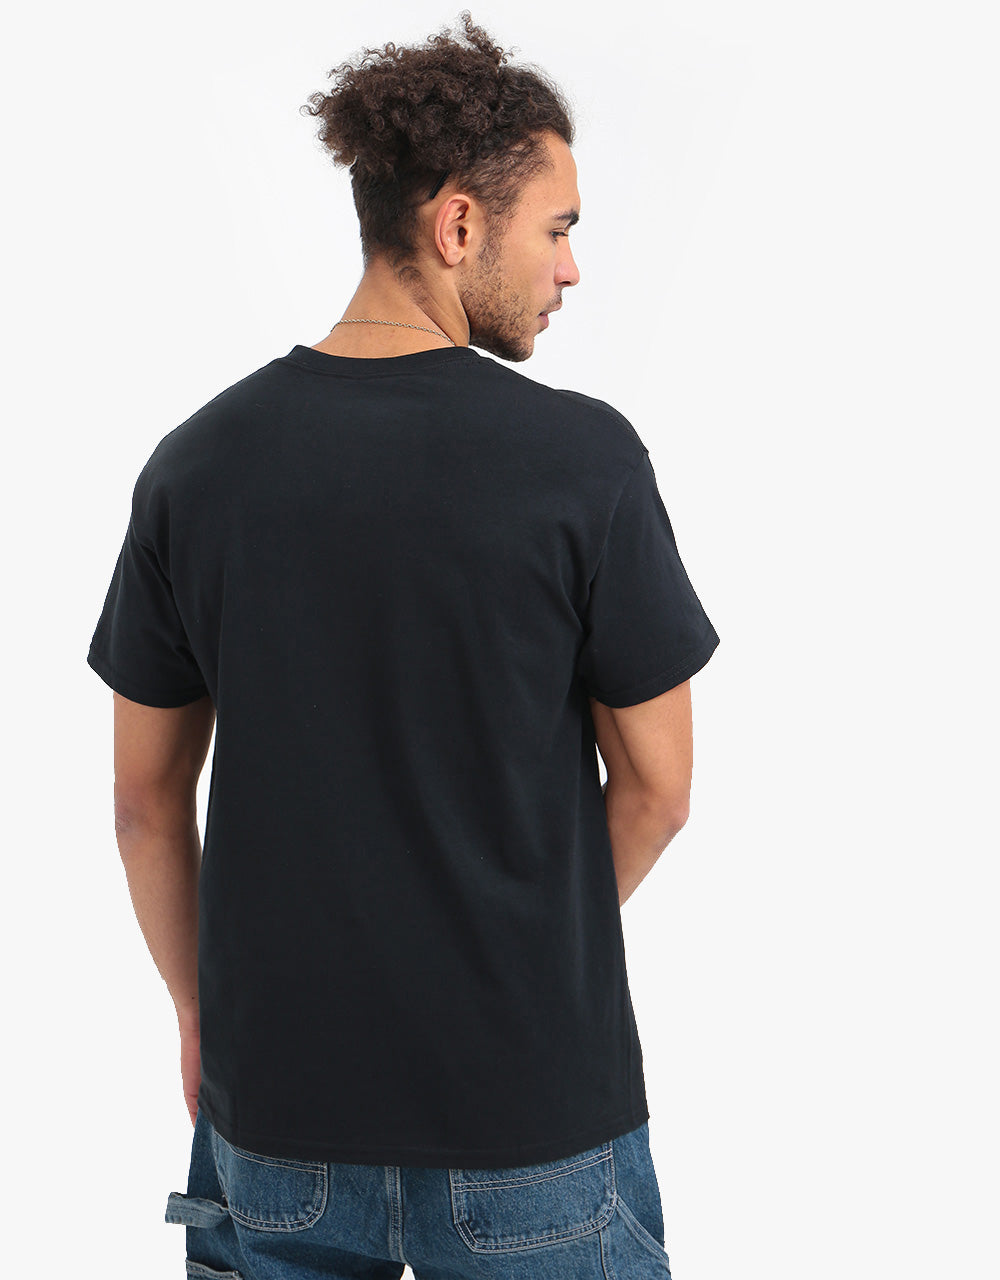 Route One Ransom T-Shirt - Black